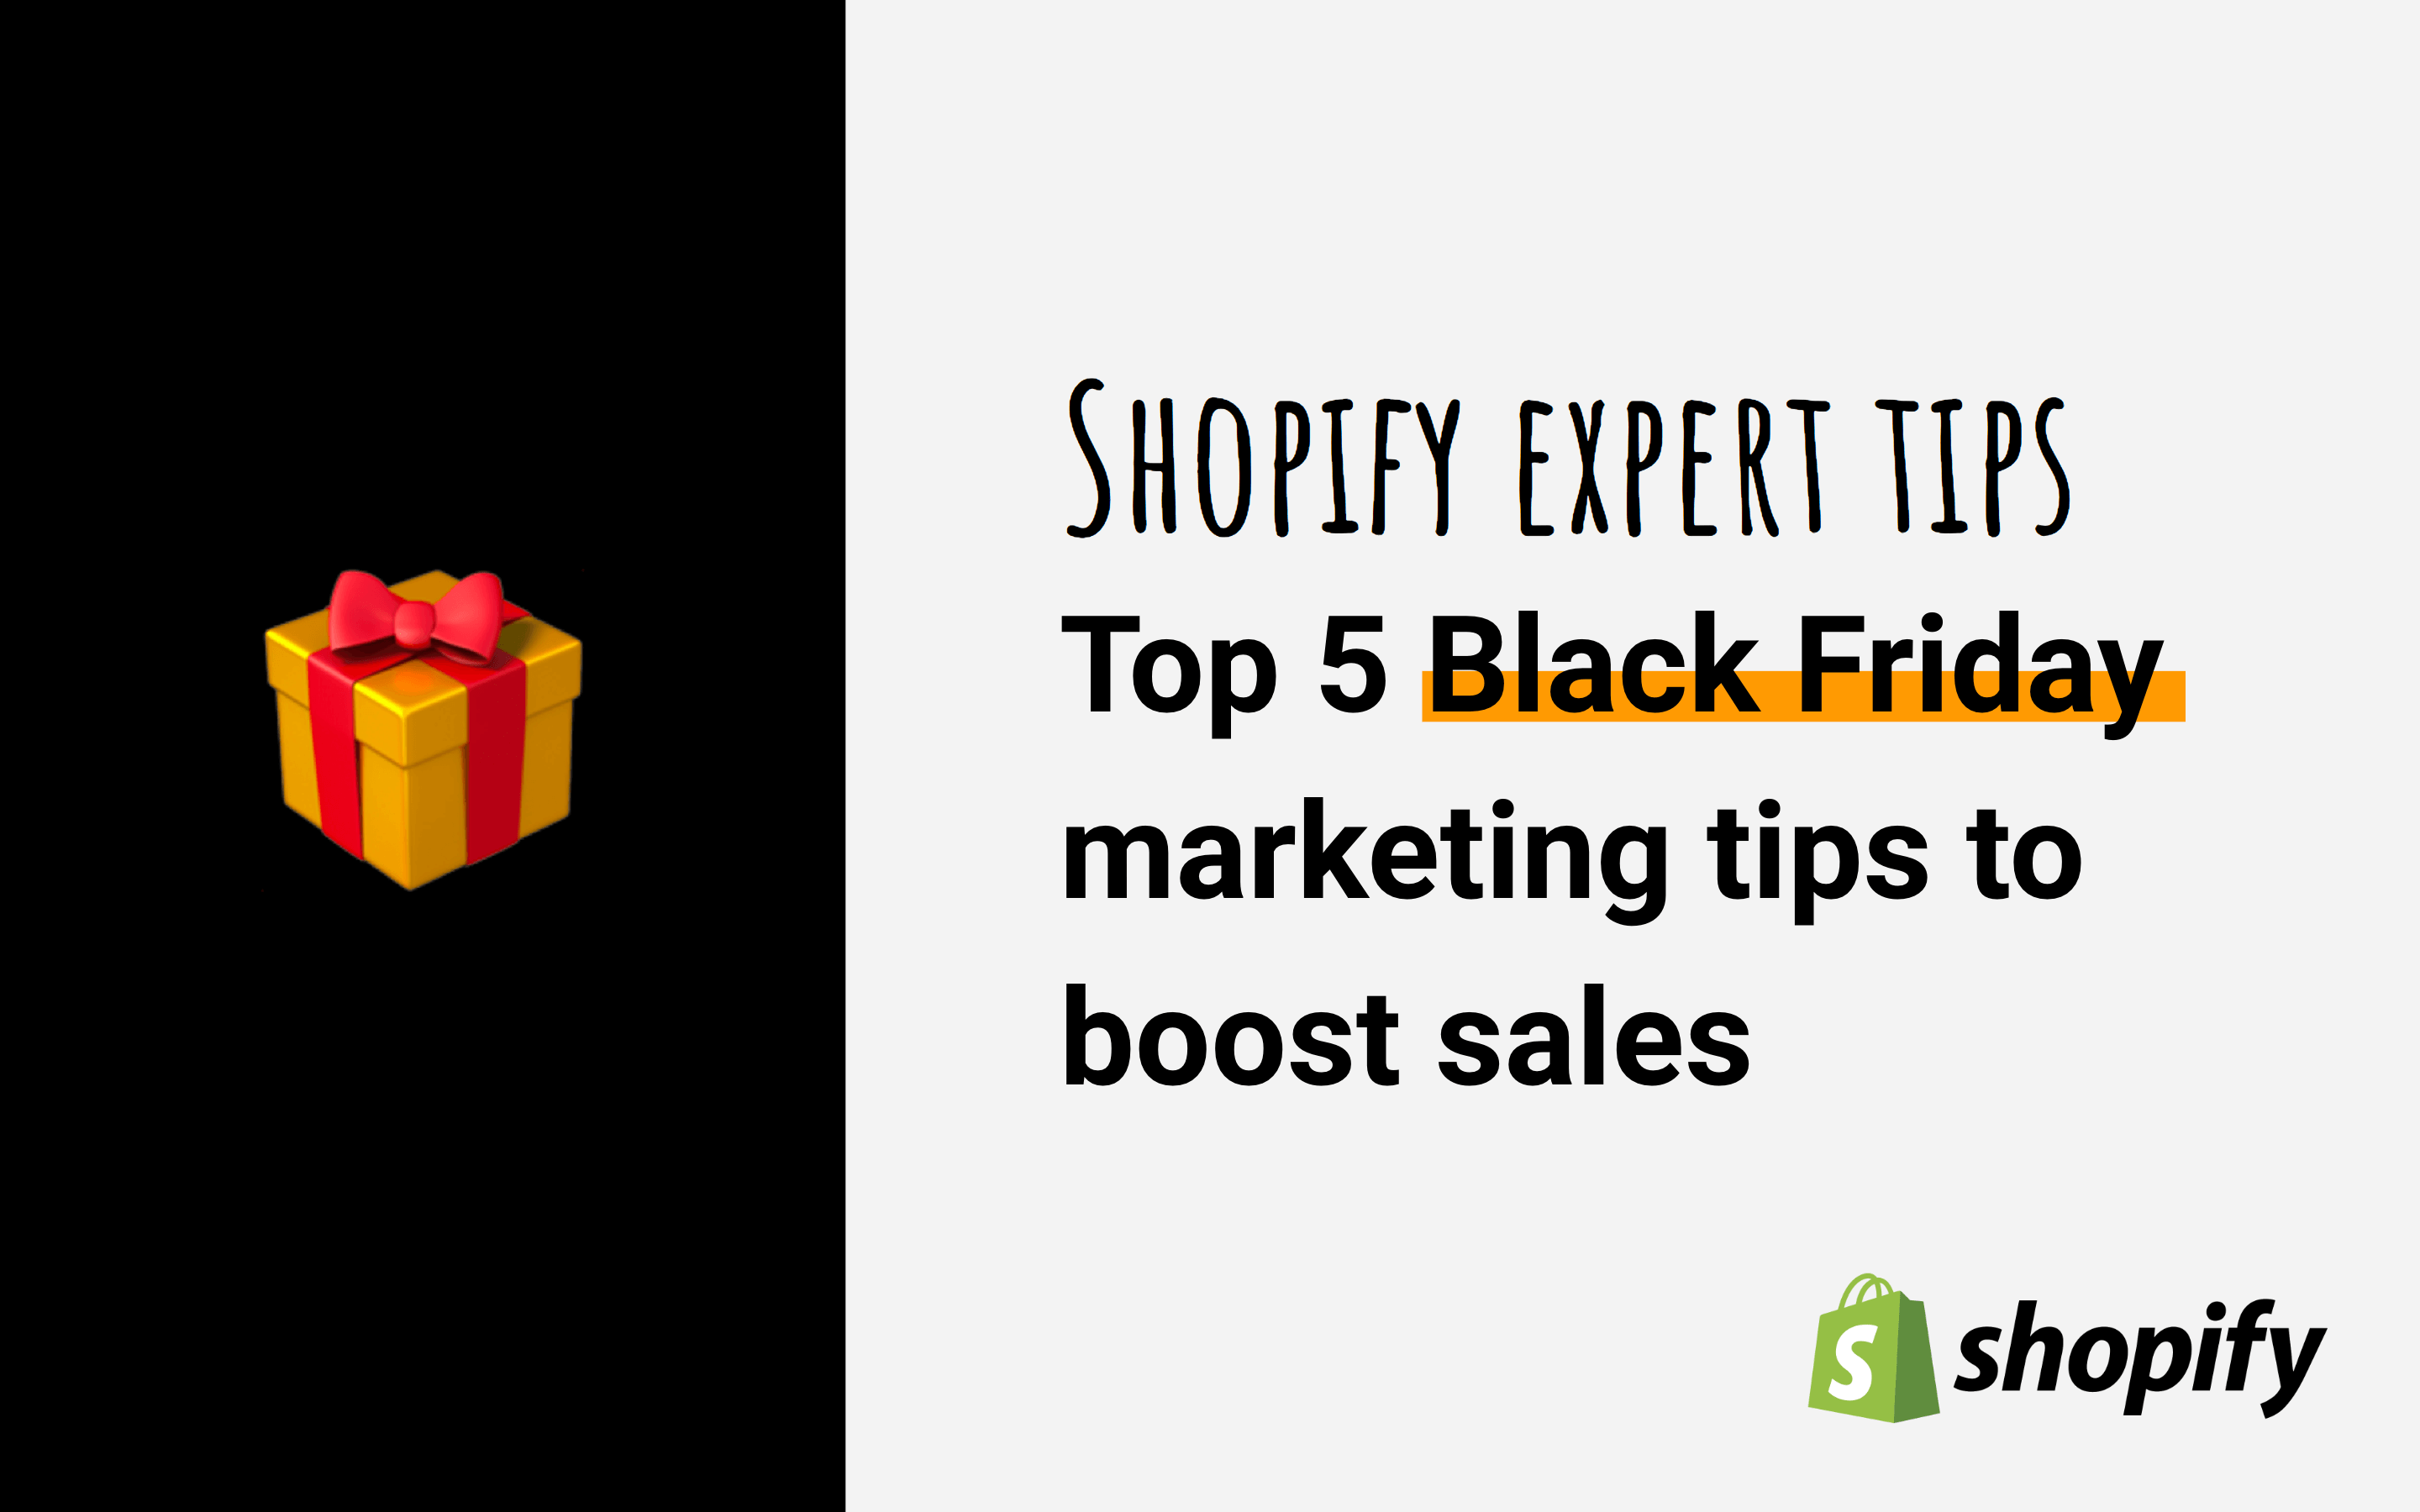 Shopify Expert Tips: Top 5 Black Friday marketing tips to boost sales